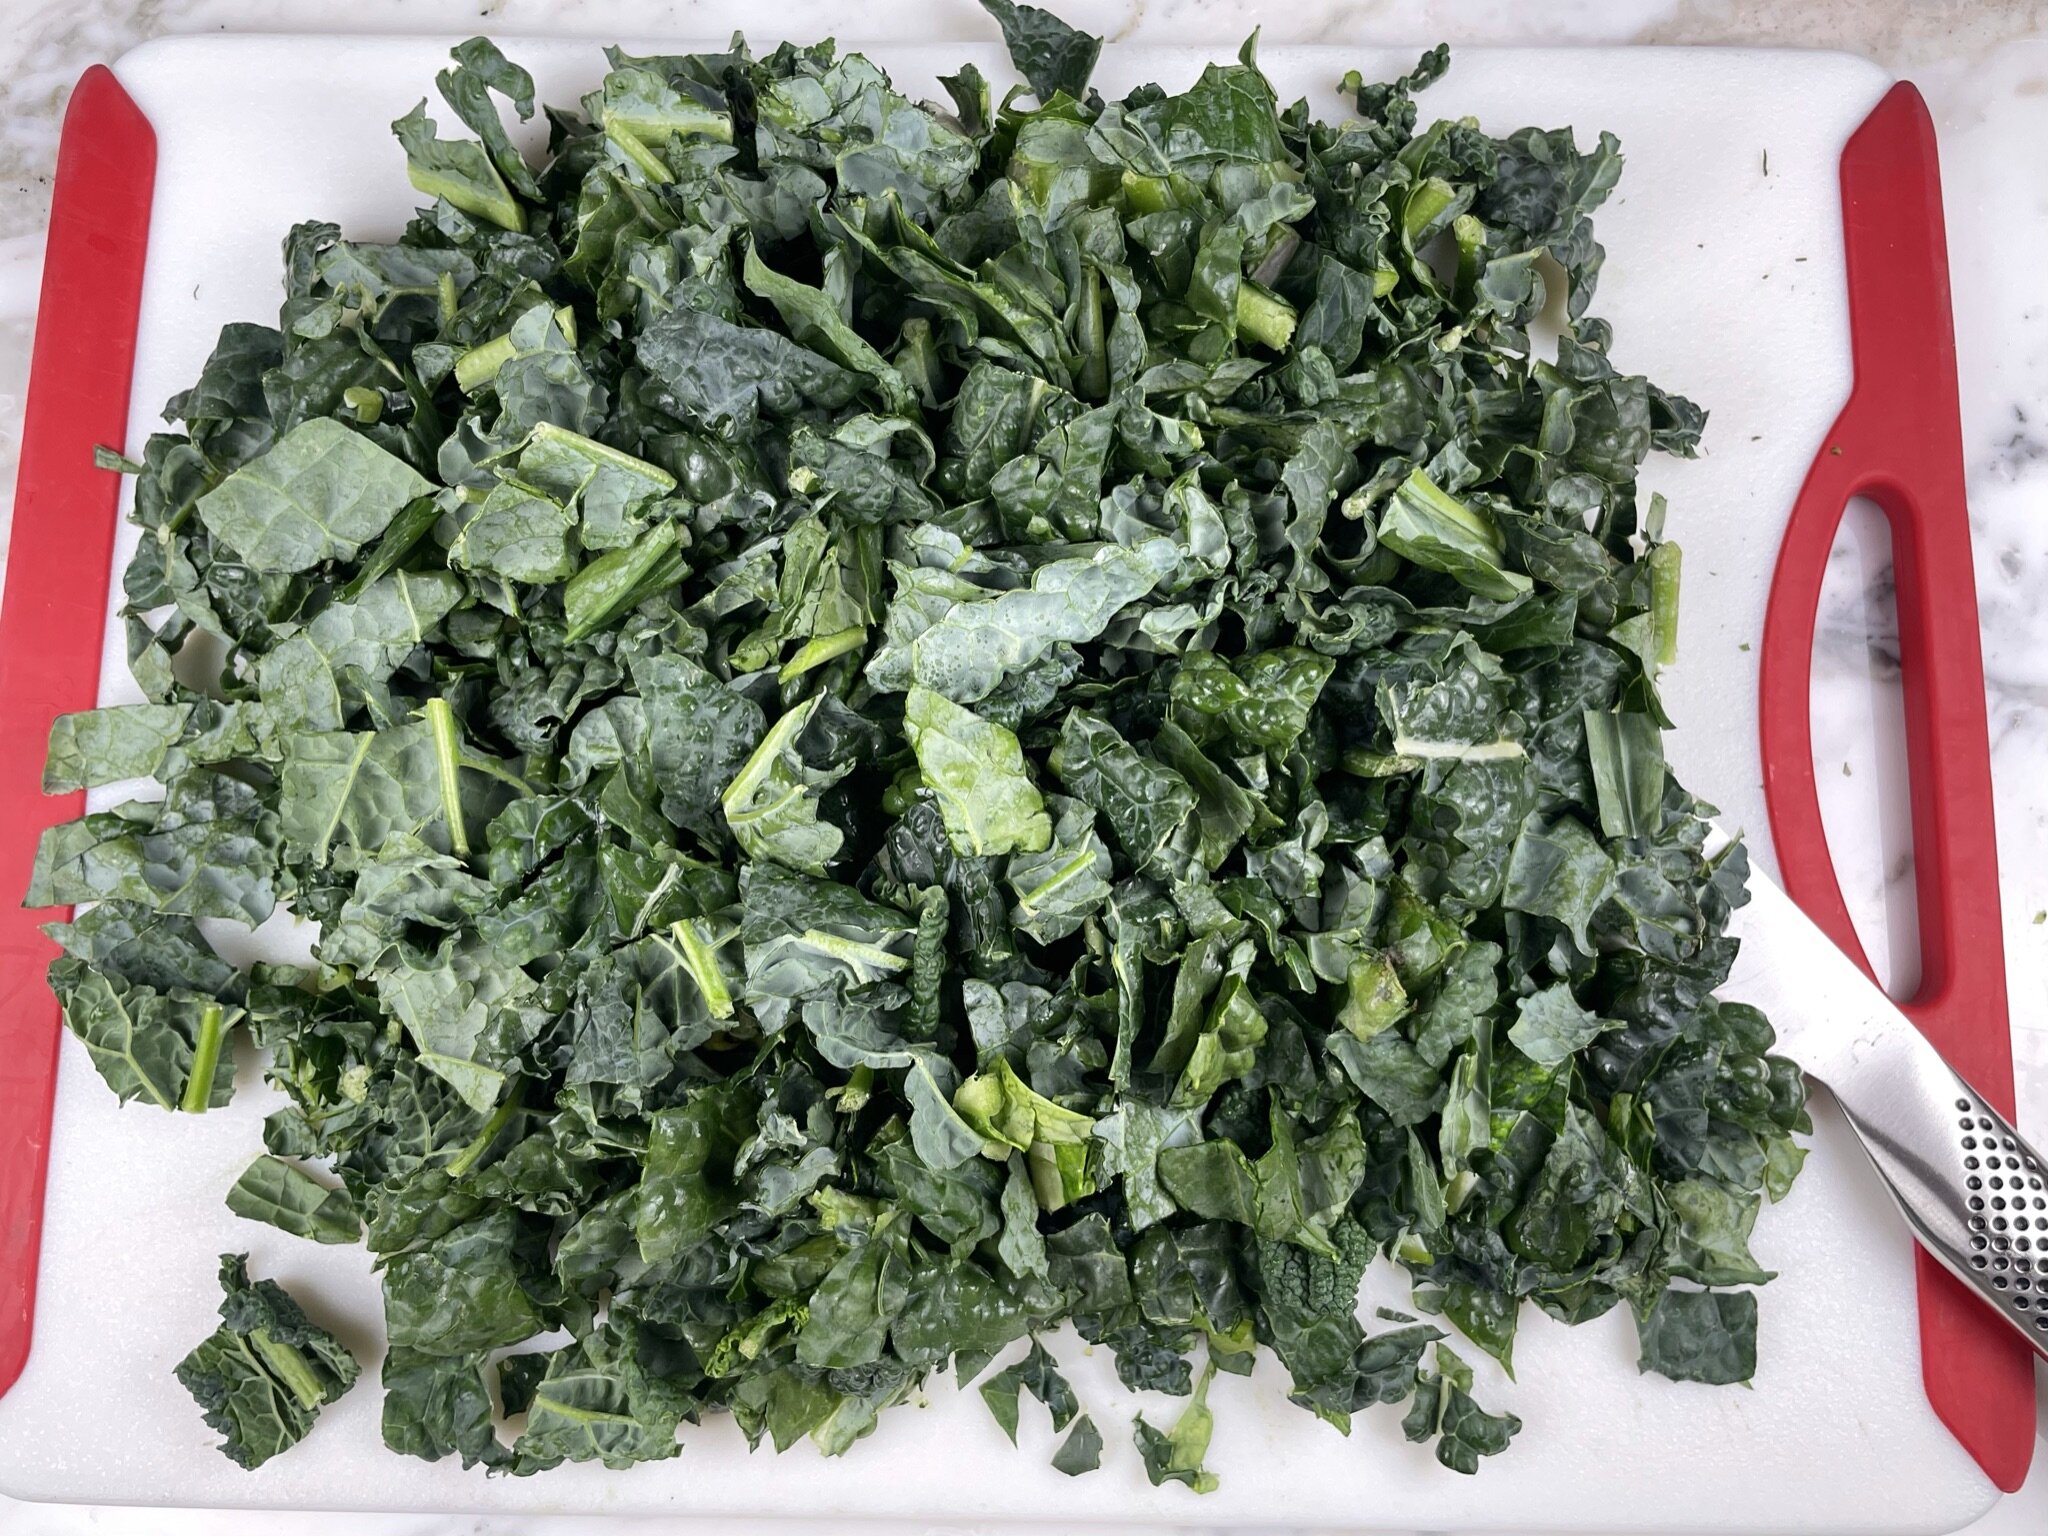 Roughly chop kale.